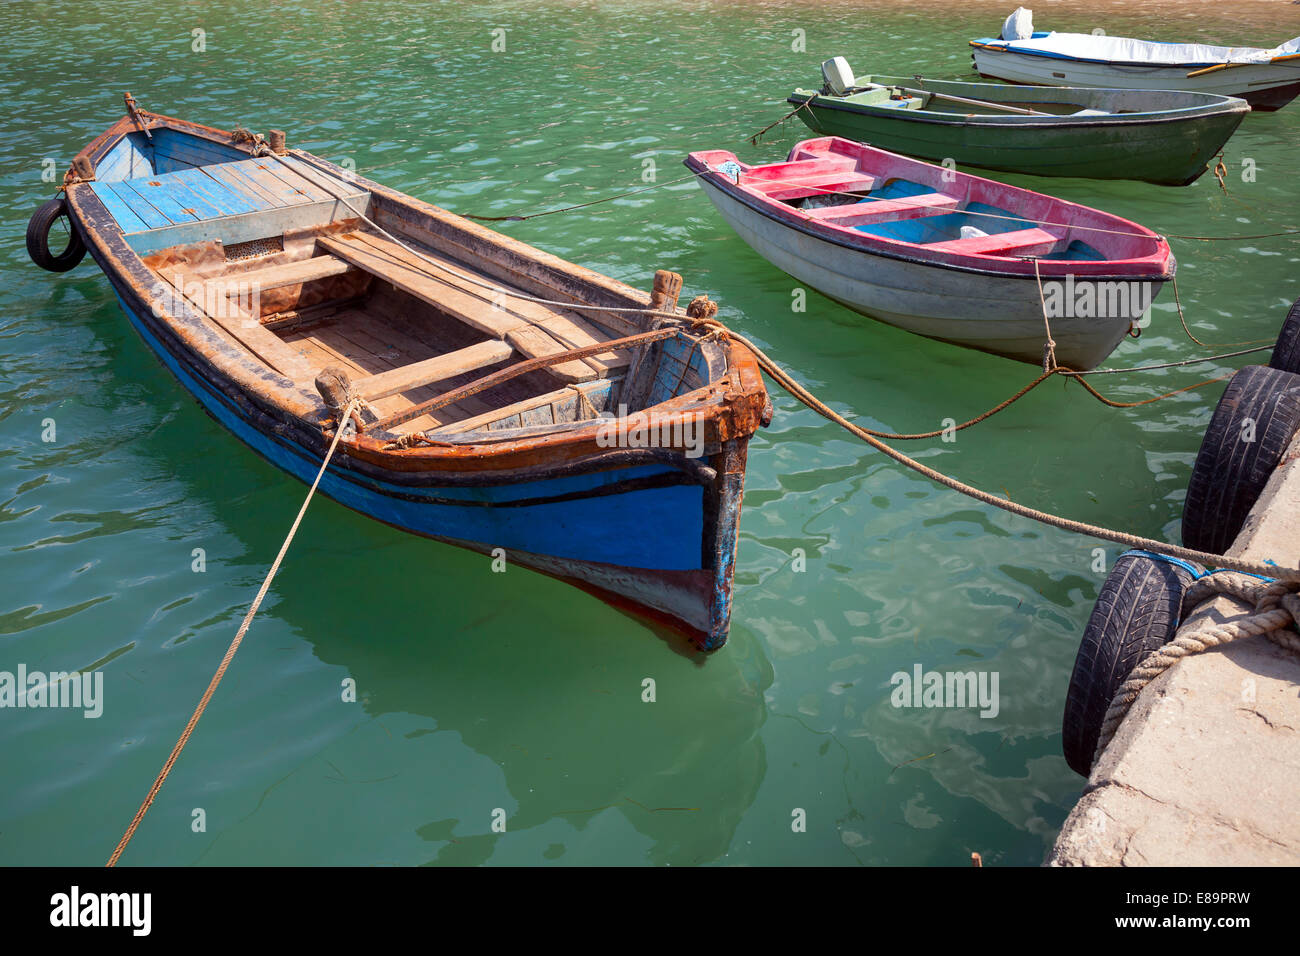 View of a small wooden fishing boat with fishing tackle. 4705296